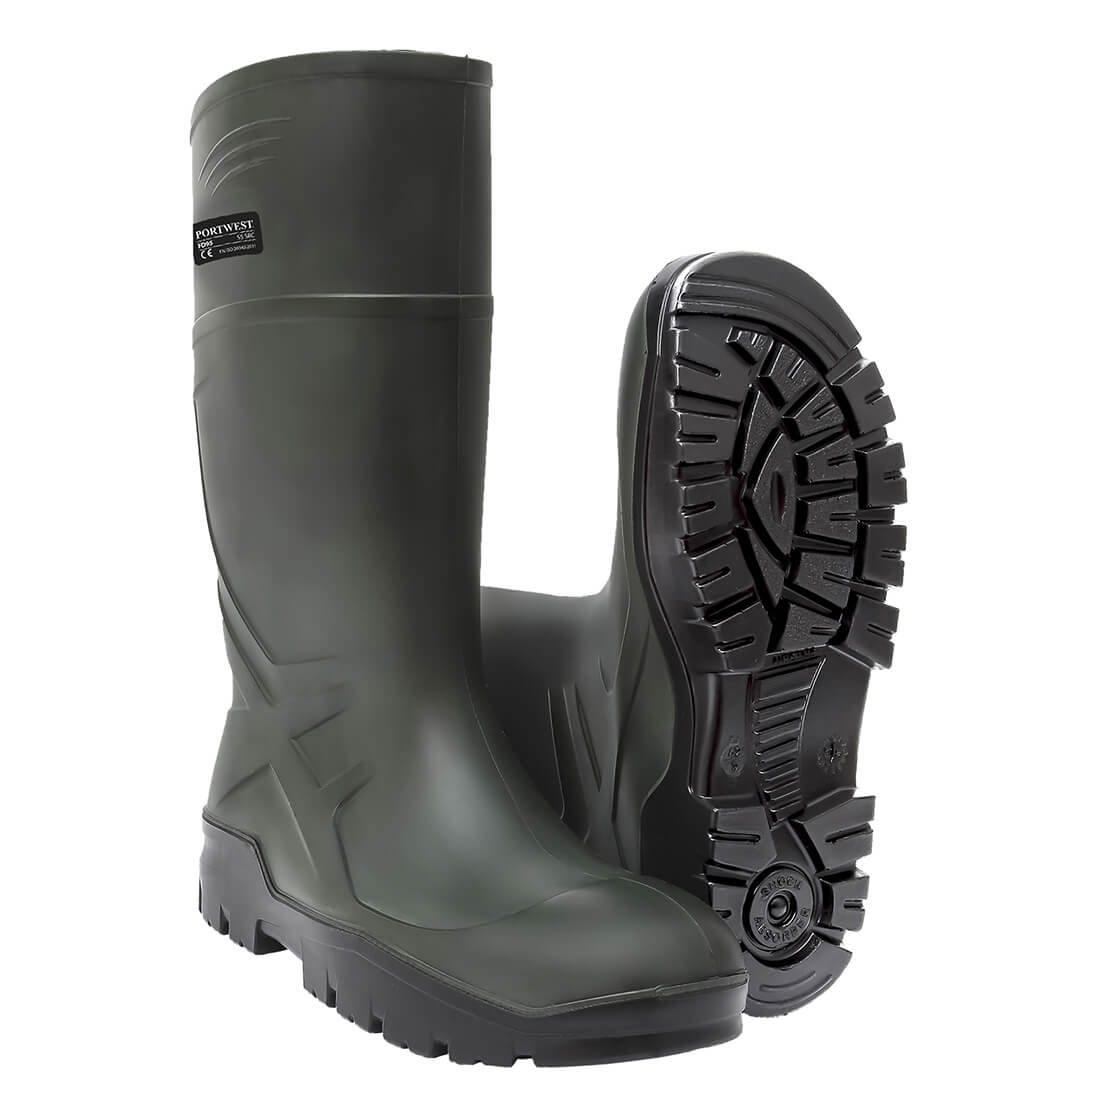 Portwest PU Non Safety Wellington Boots Green Size 10